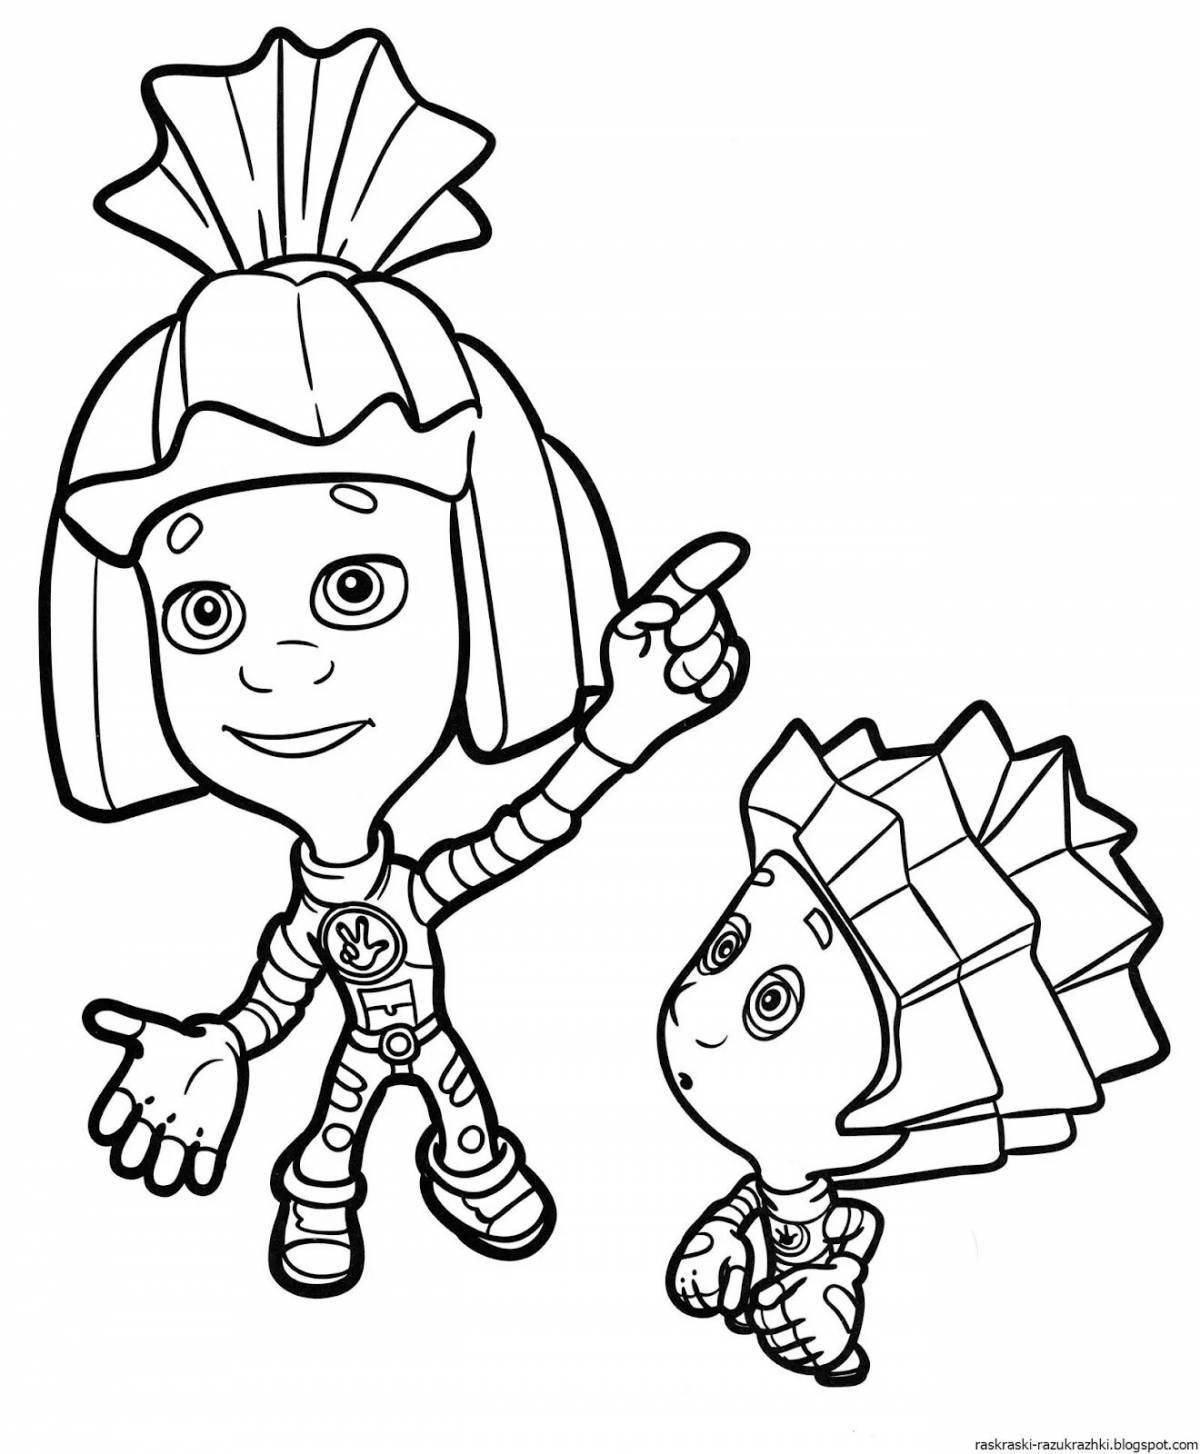 Shiny Fixies Coloring Pages for Toddlers